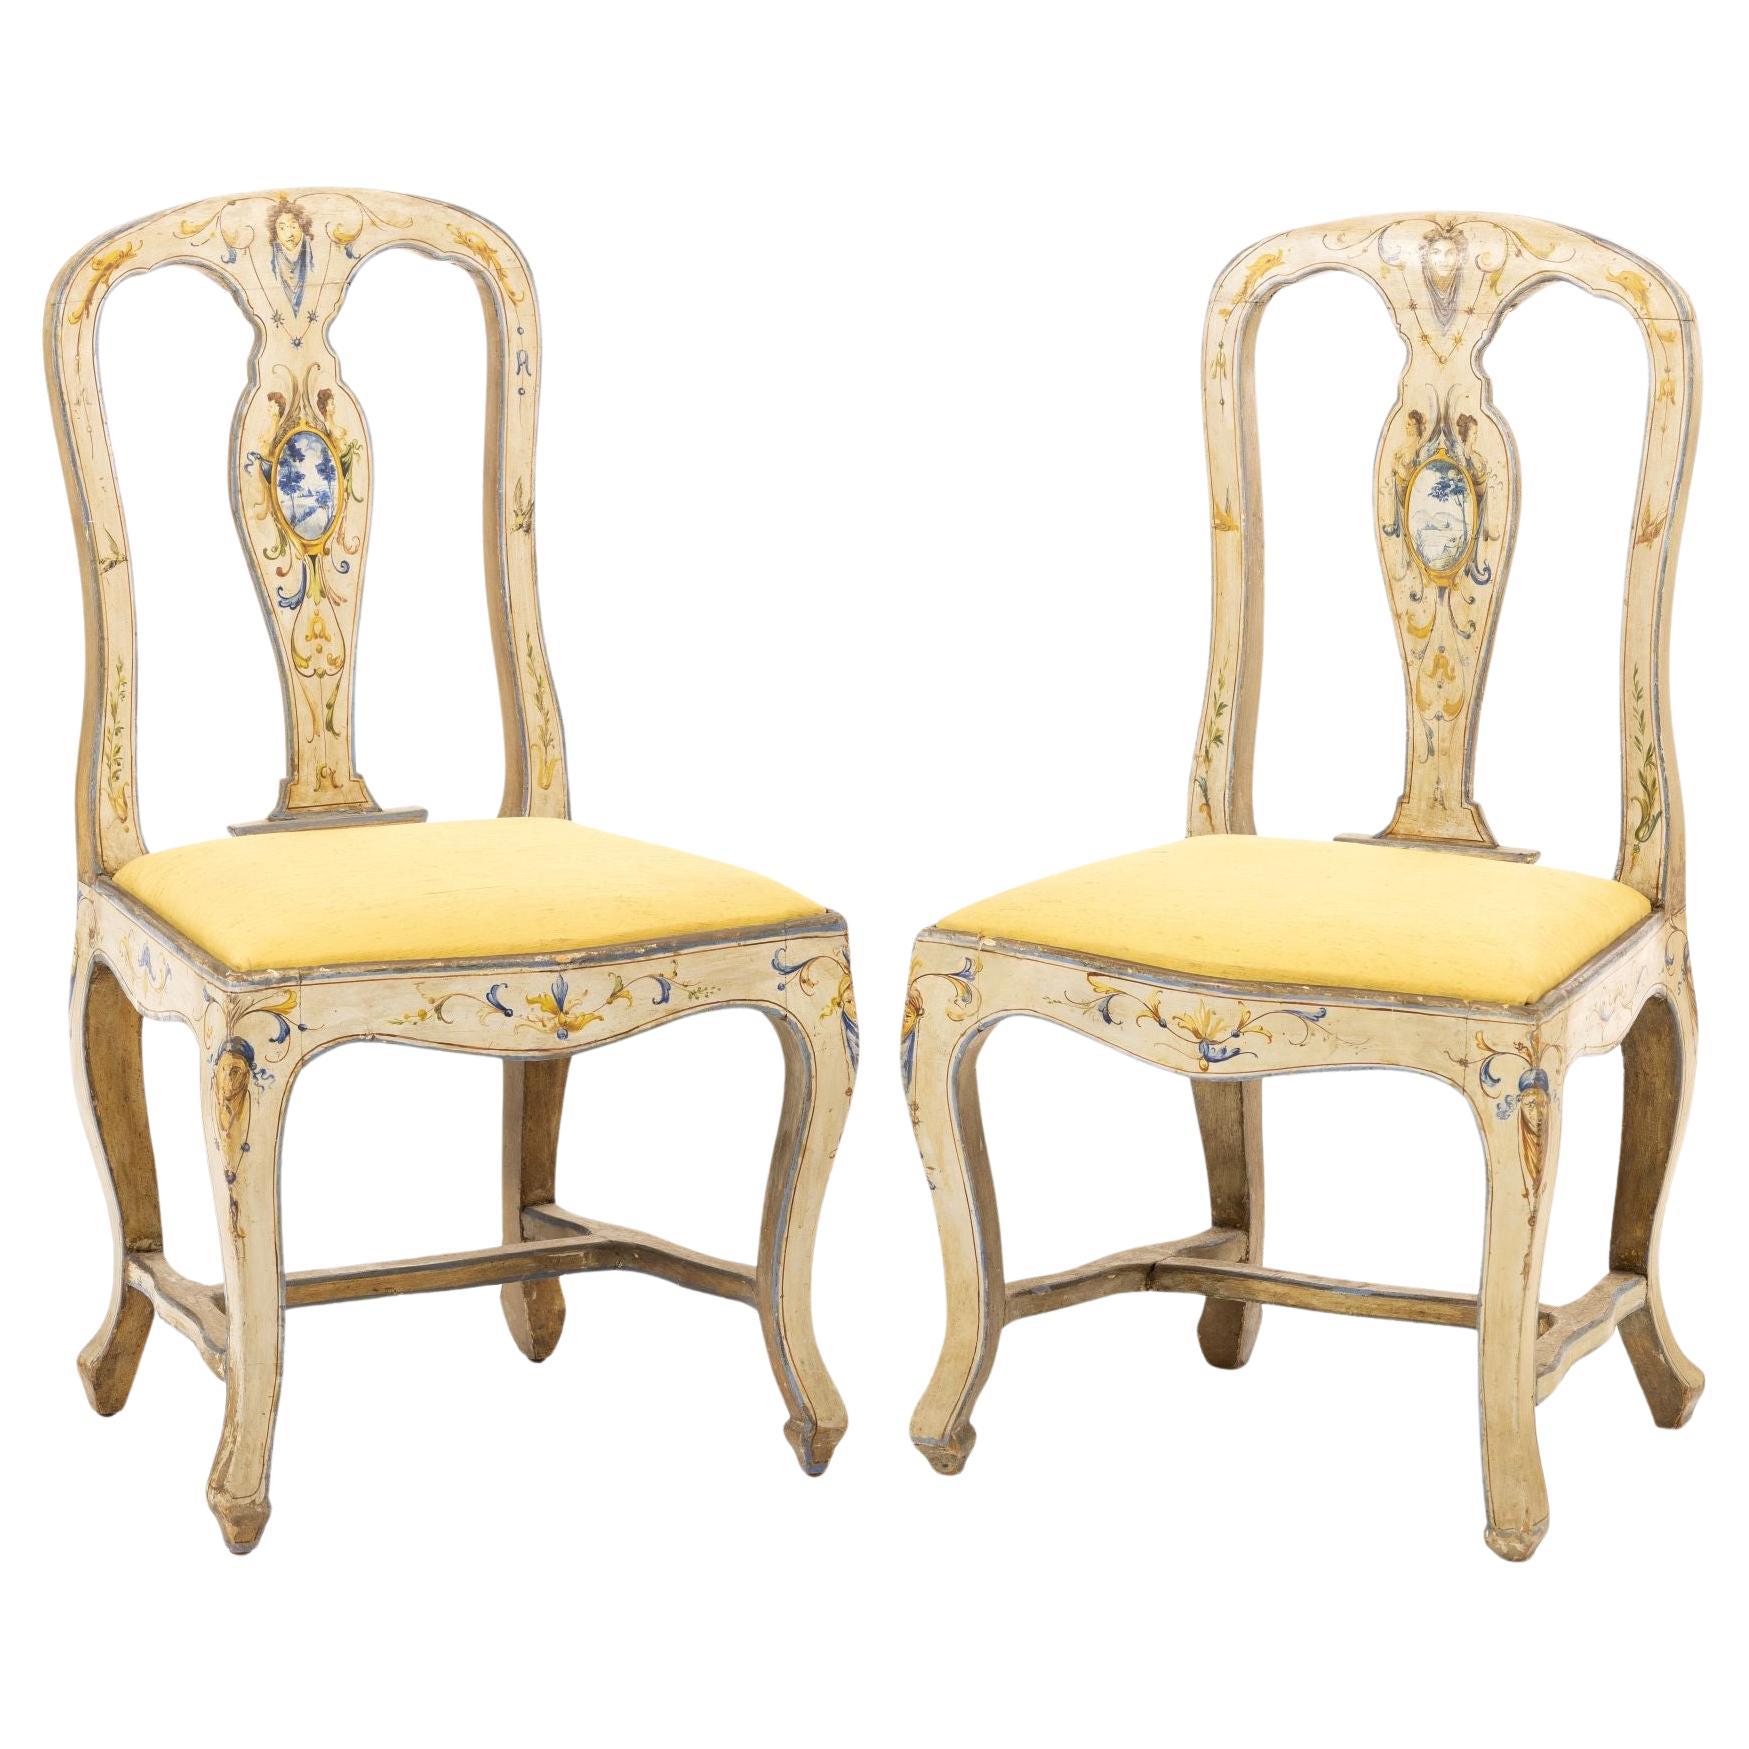 Pair of Painted Woodwork Italian Chairs 